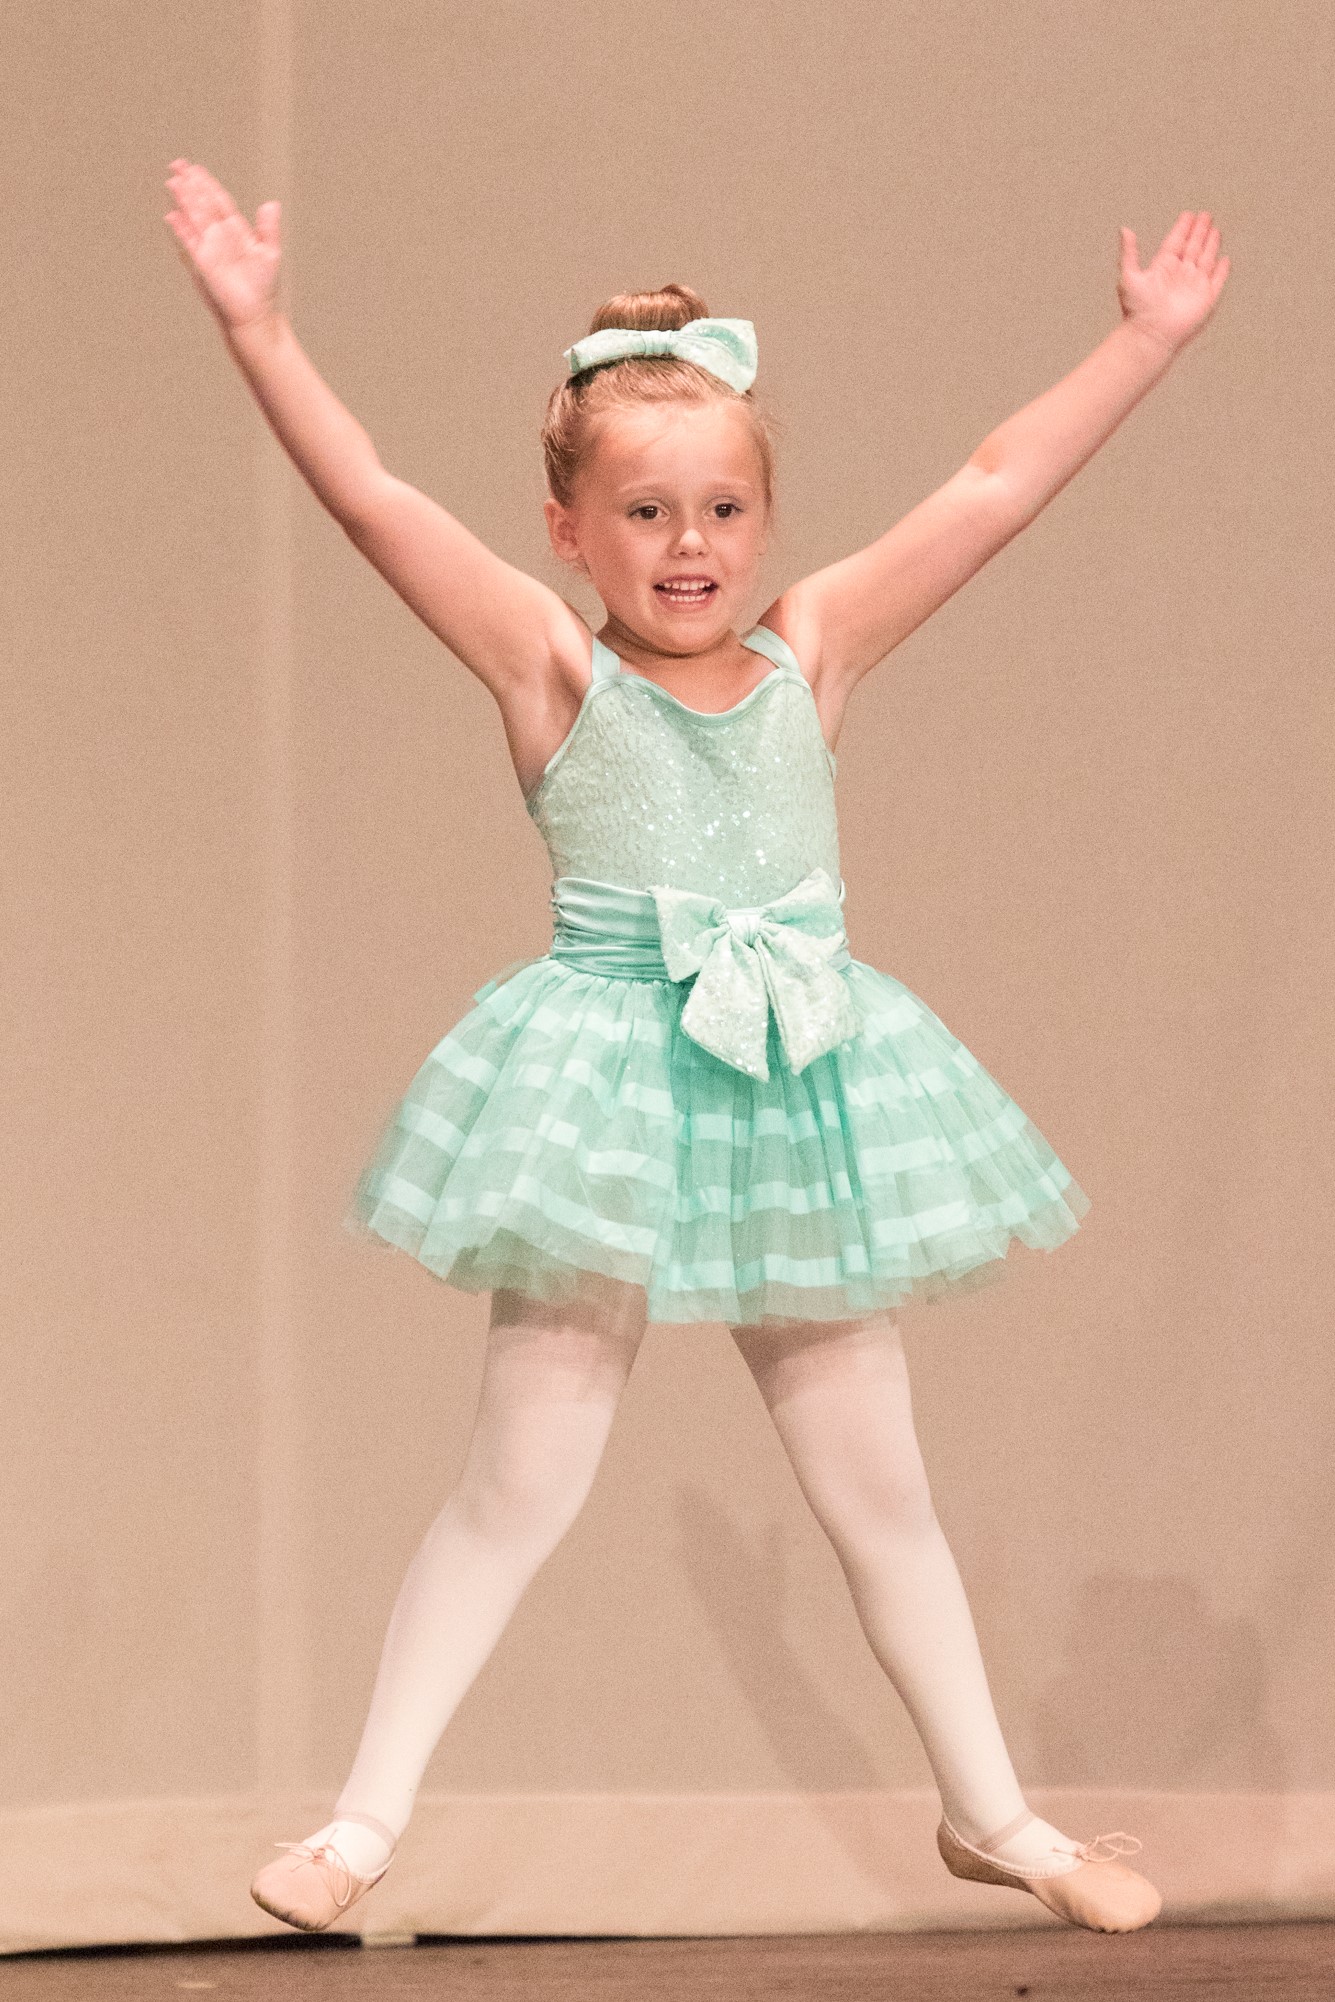 Pre-Ballet 1 (age 3 to 5)